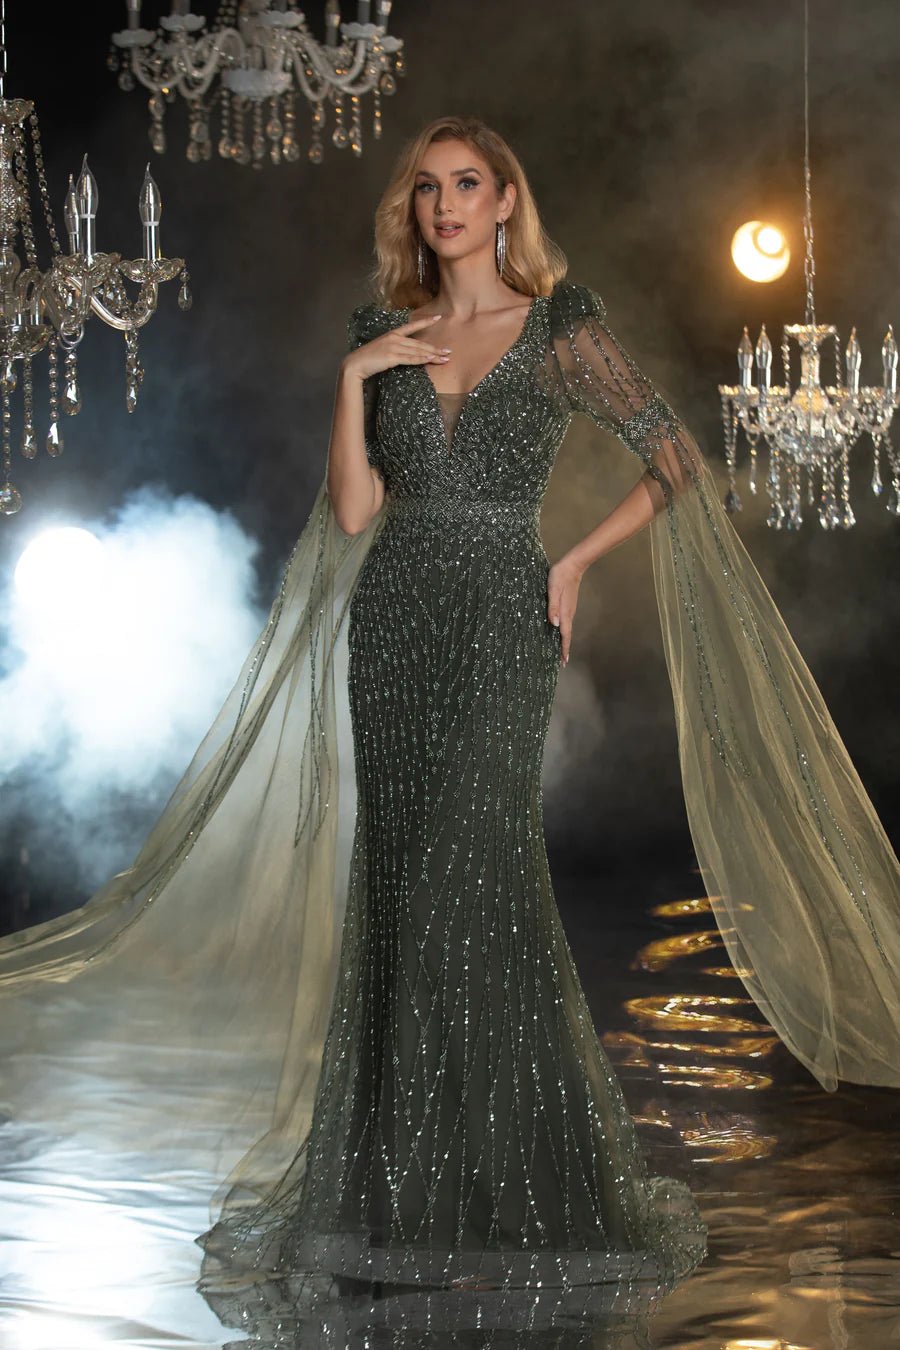 Luxurious Sage Green Sequin Evening Gown with Cape Sleeves - Pretty Sequin Dress and Elegant Cape Dress Plus Size - WonderlandByLilian